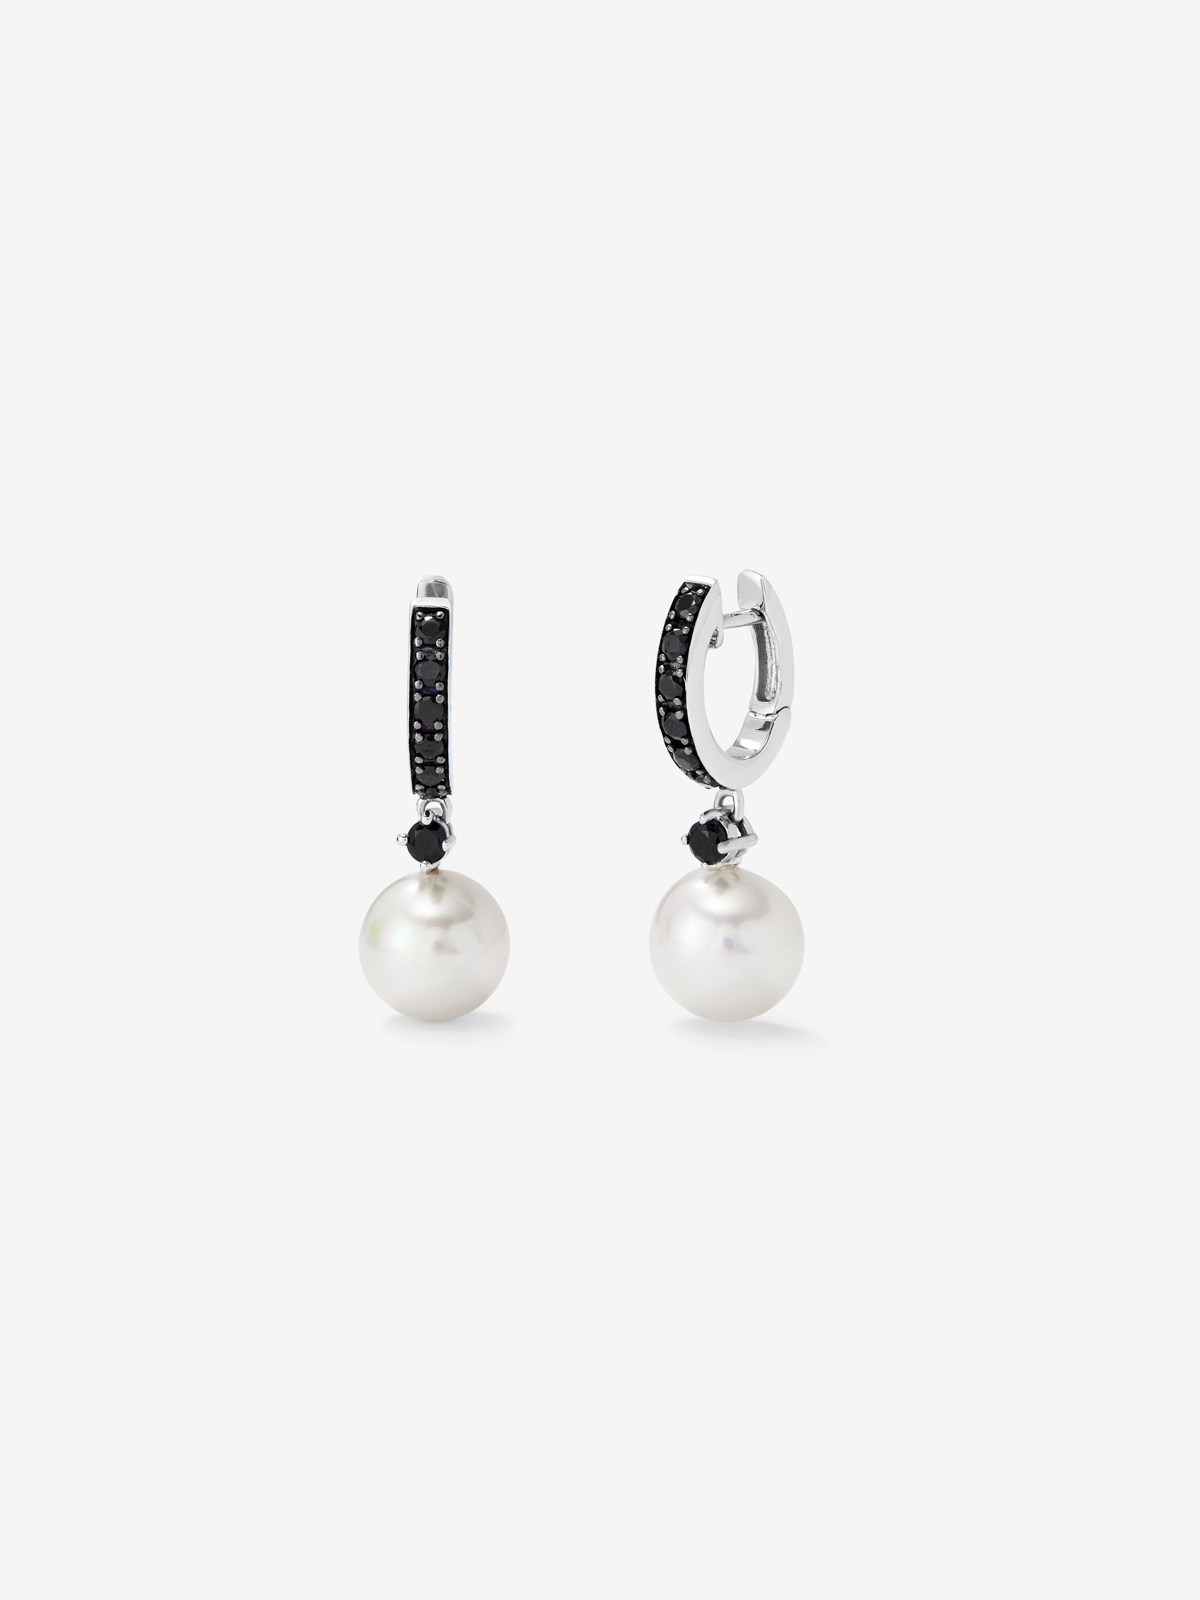 925 Silver hoop earring combined with 8.5 mm Akoya pearl and spinel.